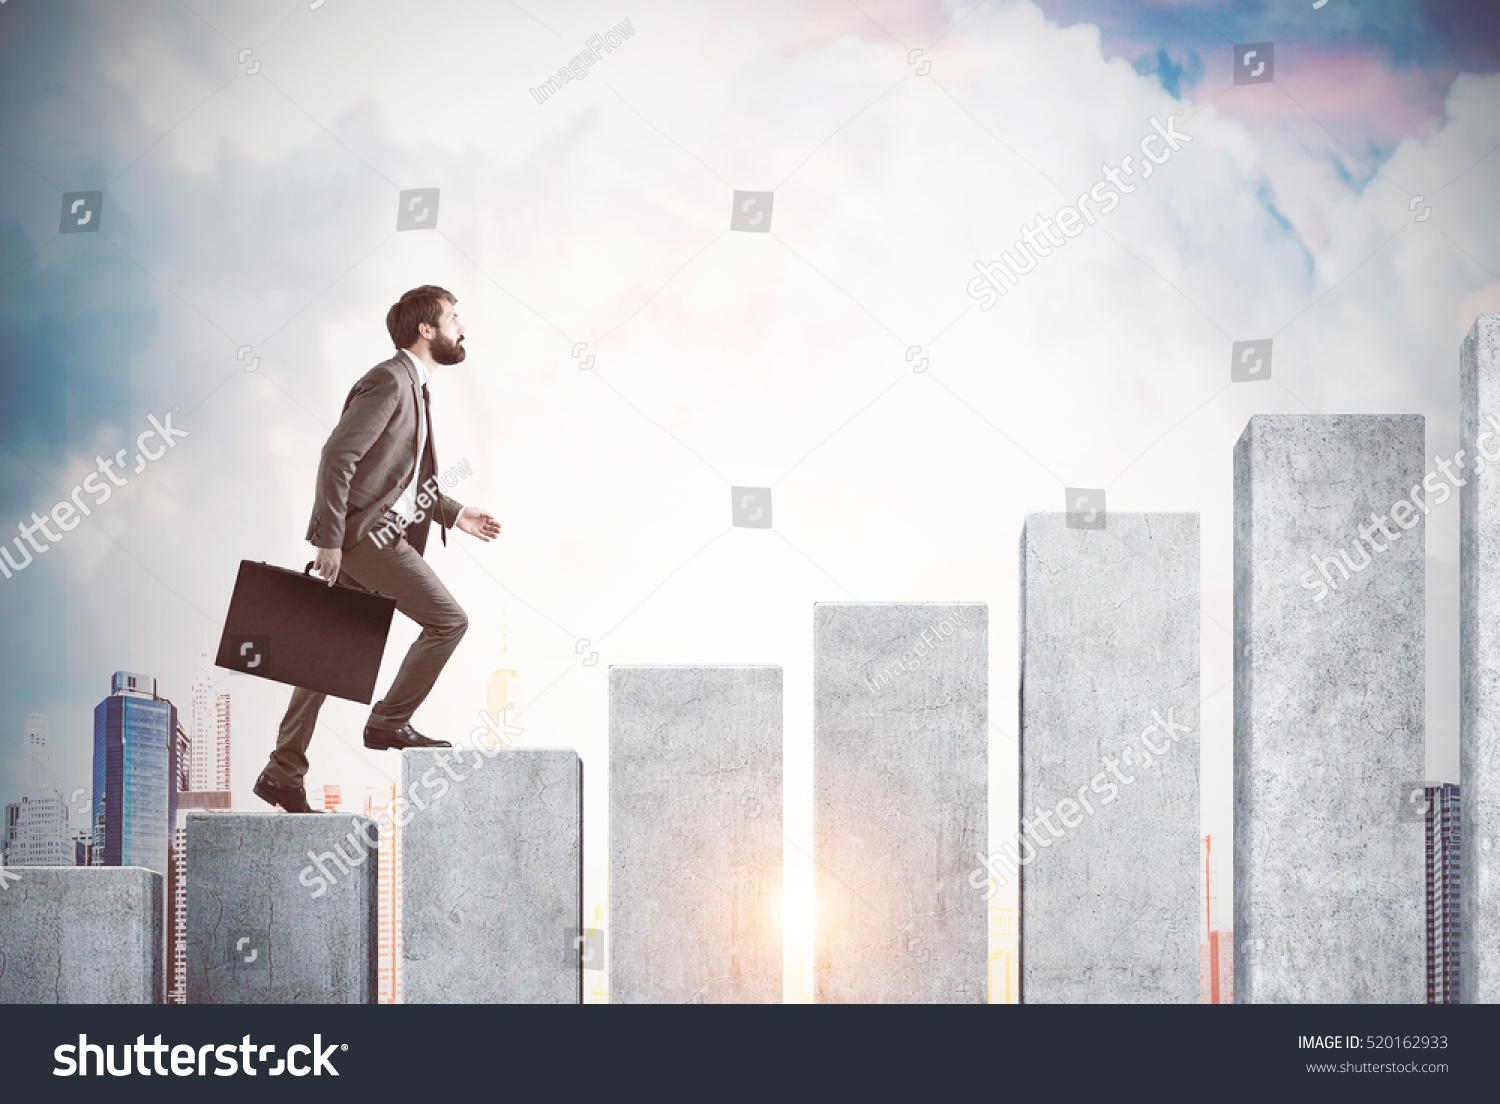 Side view of a man climbing the concrete stairs made in the shape of a graph. Cloudy sky and city are in the background. Concept of success and achieving your goal. Mock up. Toned image #520162933